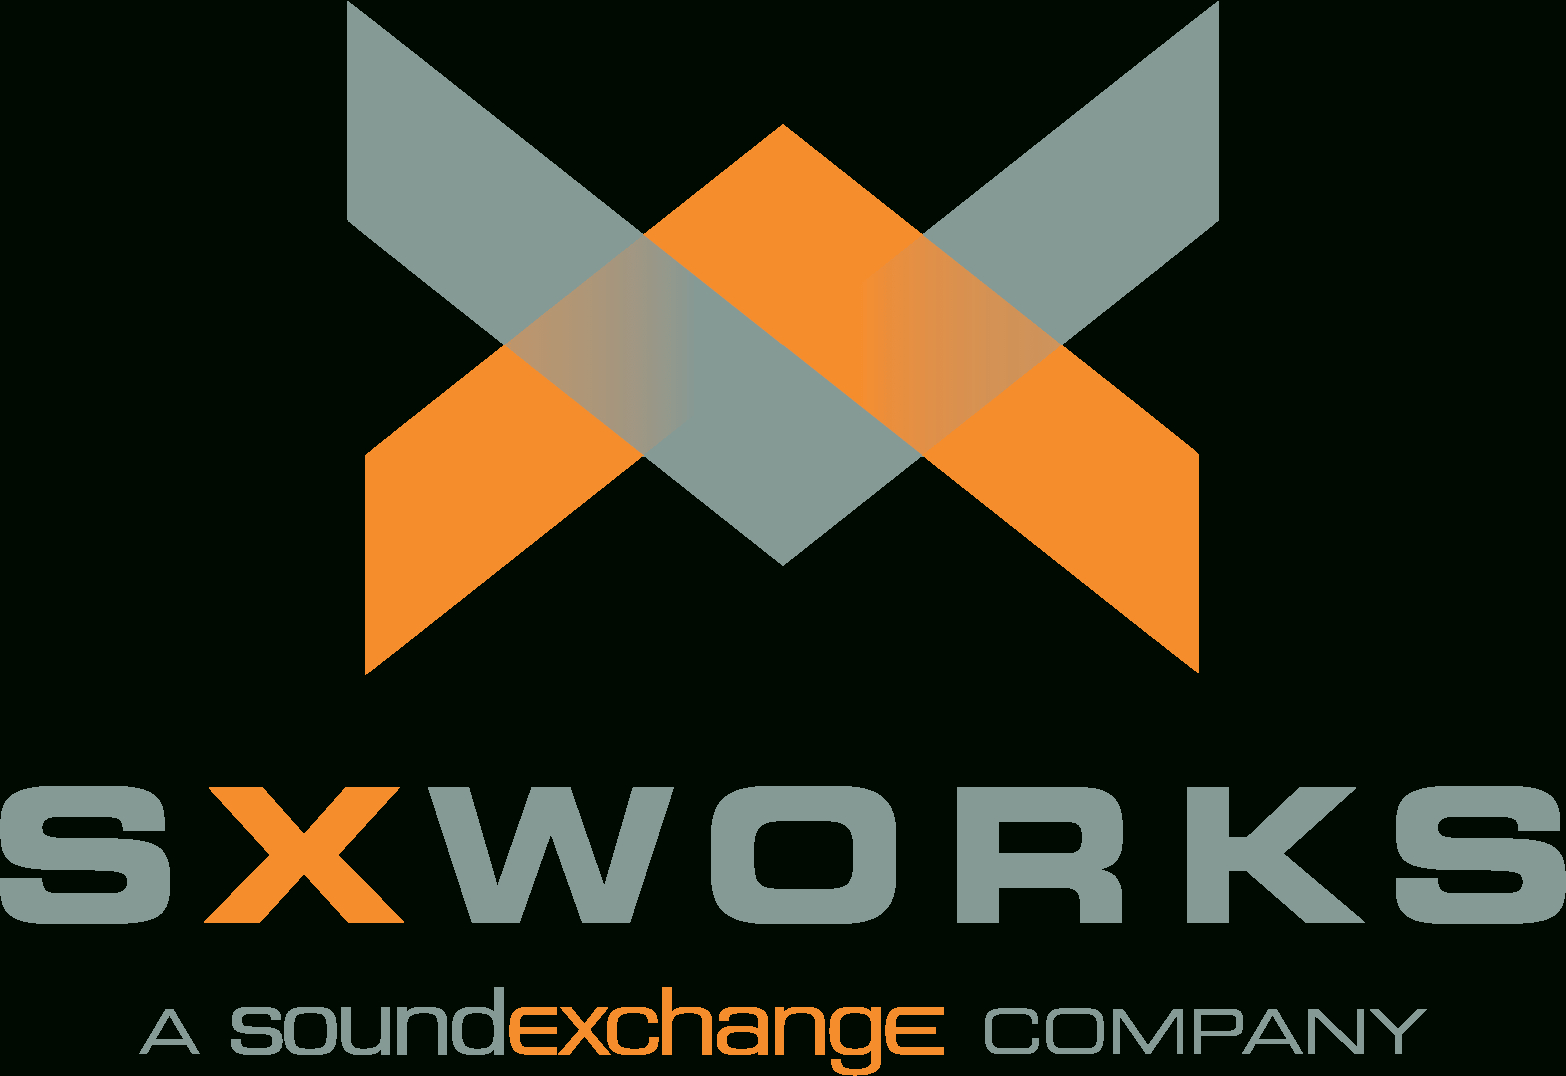 Soundexchange Spreadsheet Pertaining To Sxworks Announces New Services For Music Publishers And Songwriters